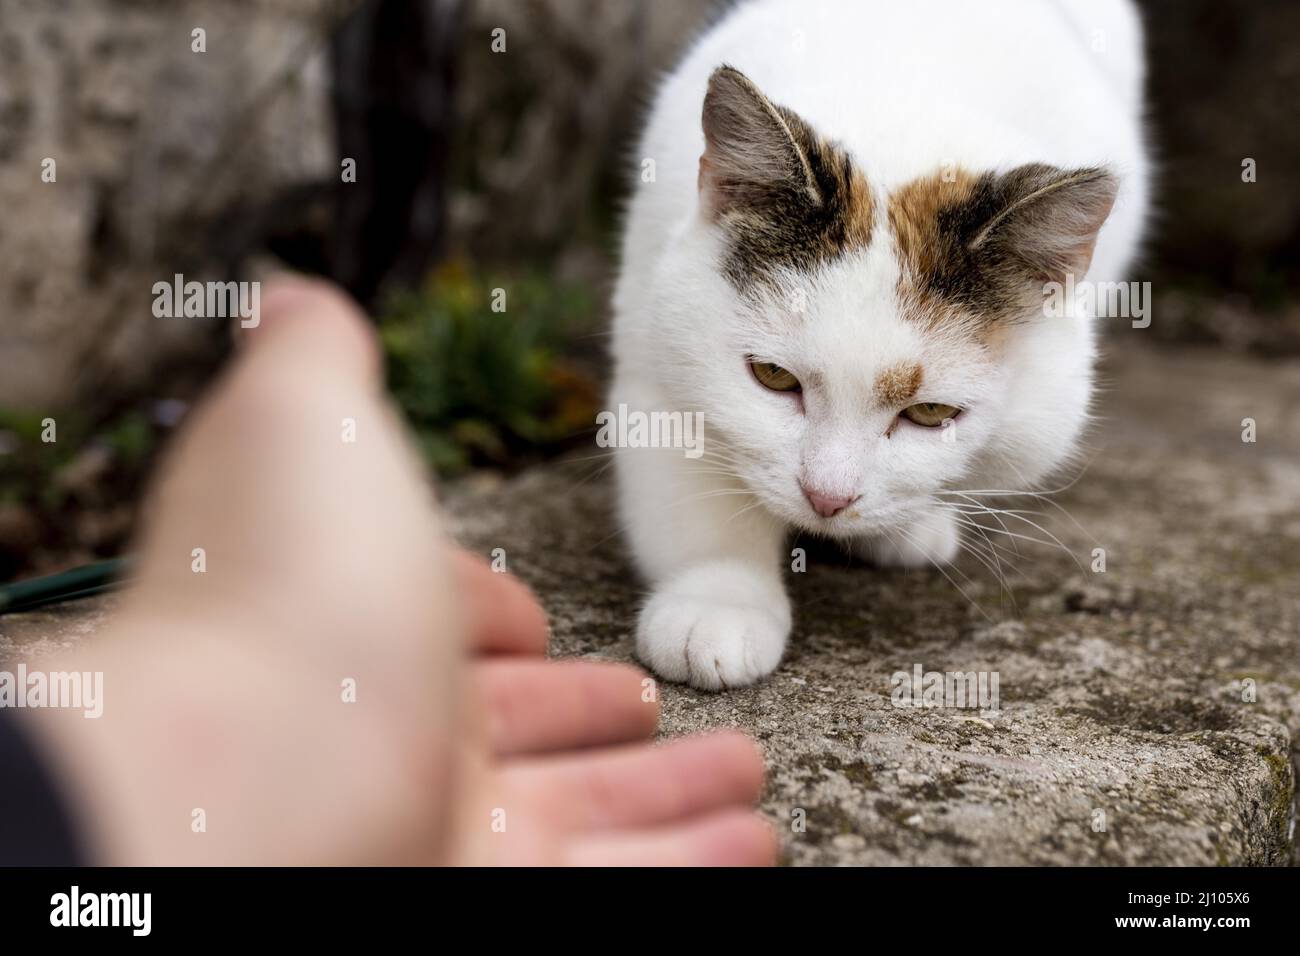 Close up hand trying touch cat Stock Photo